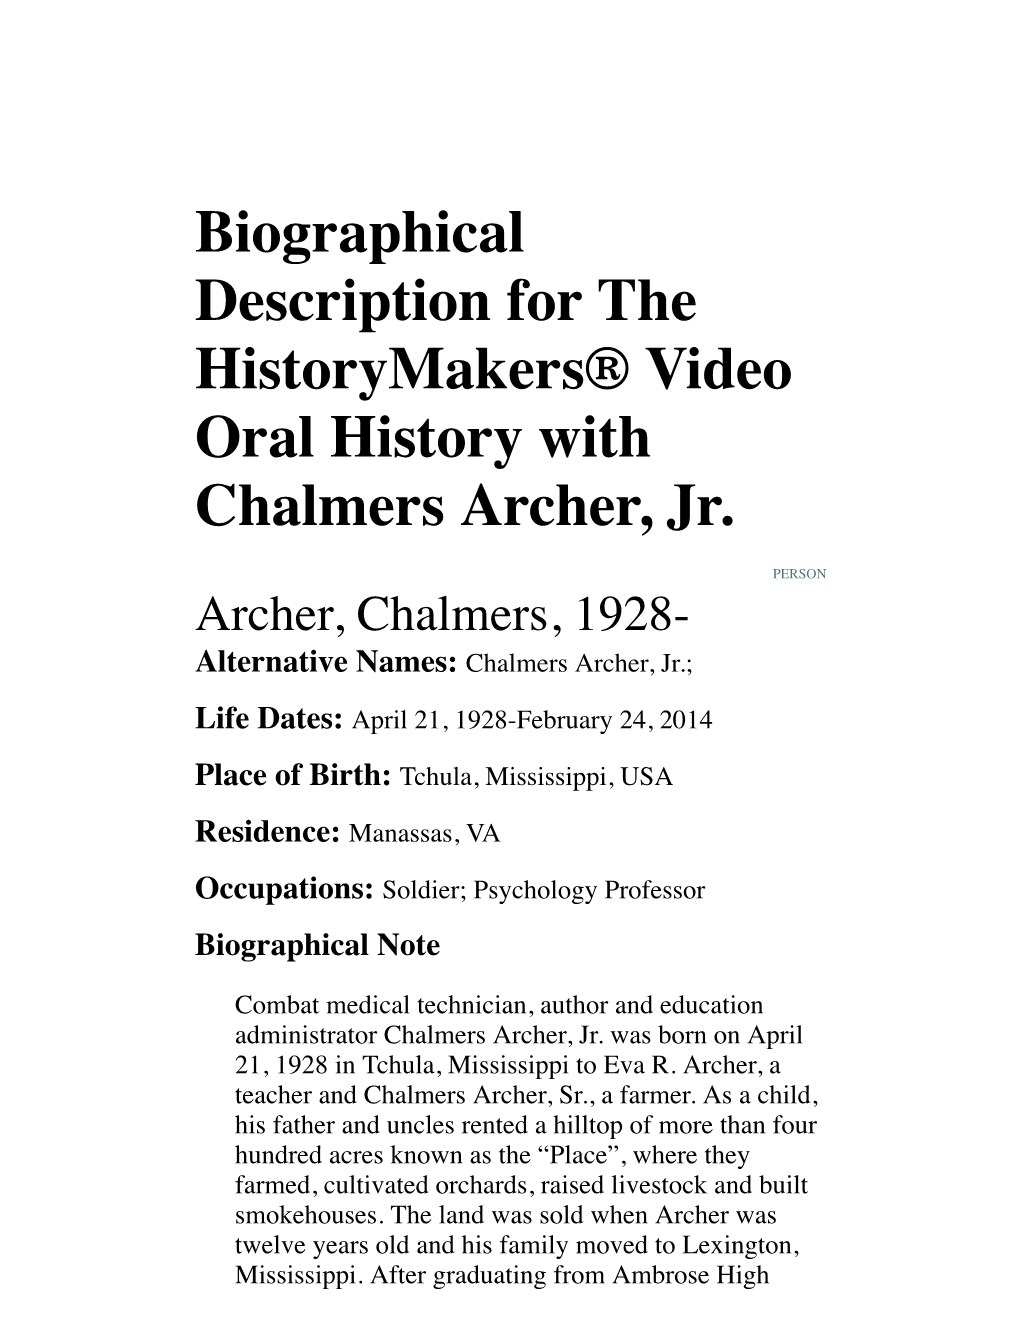 Biographical Description for the Historymakers® Video Oral History with Chalmers Archer, Jr